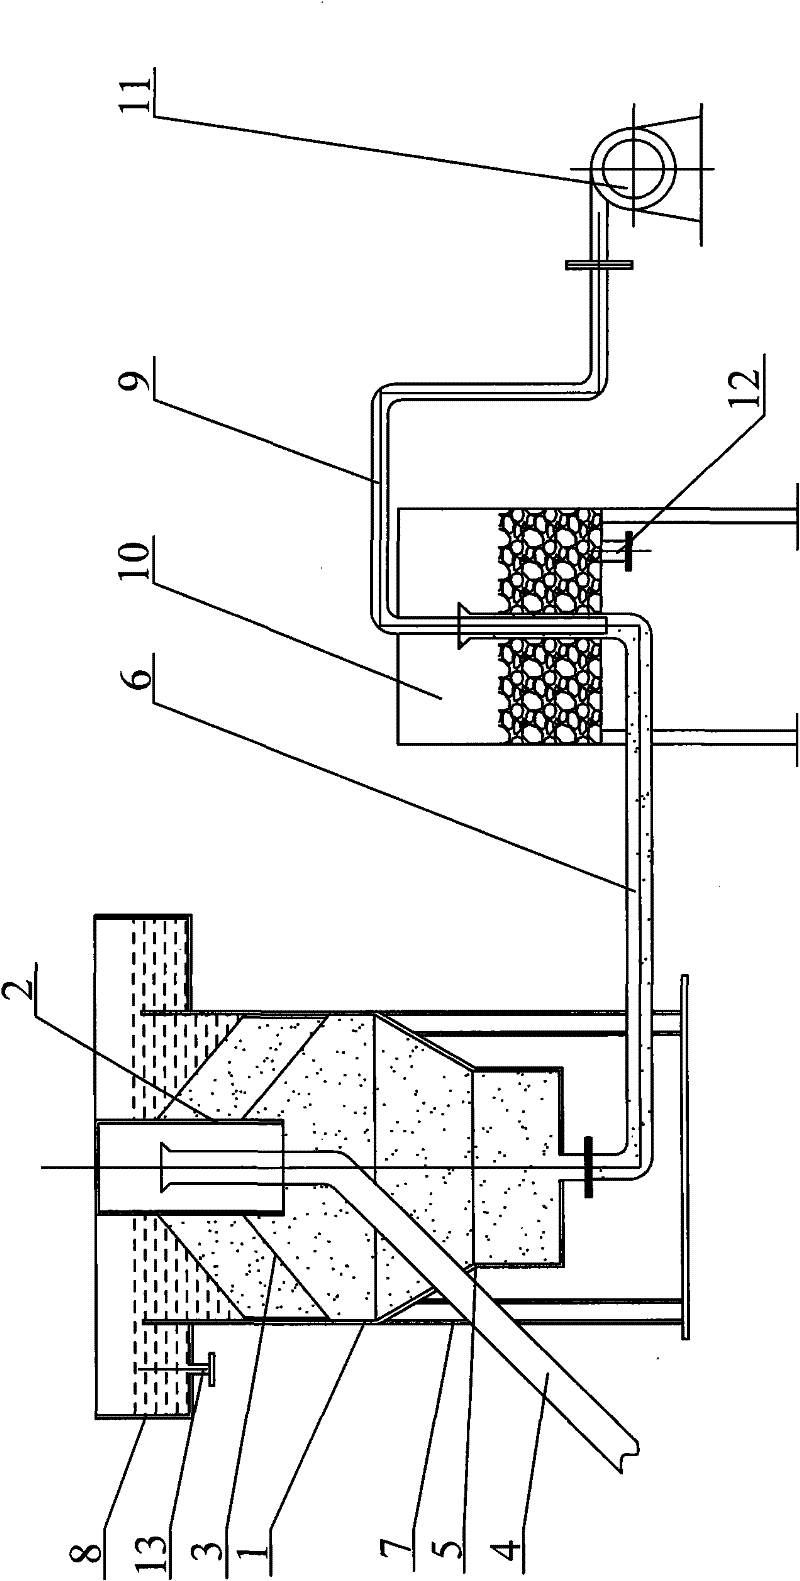 Unpowered whirling cylinder sand and sludge removing machine